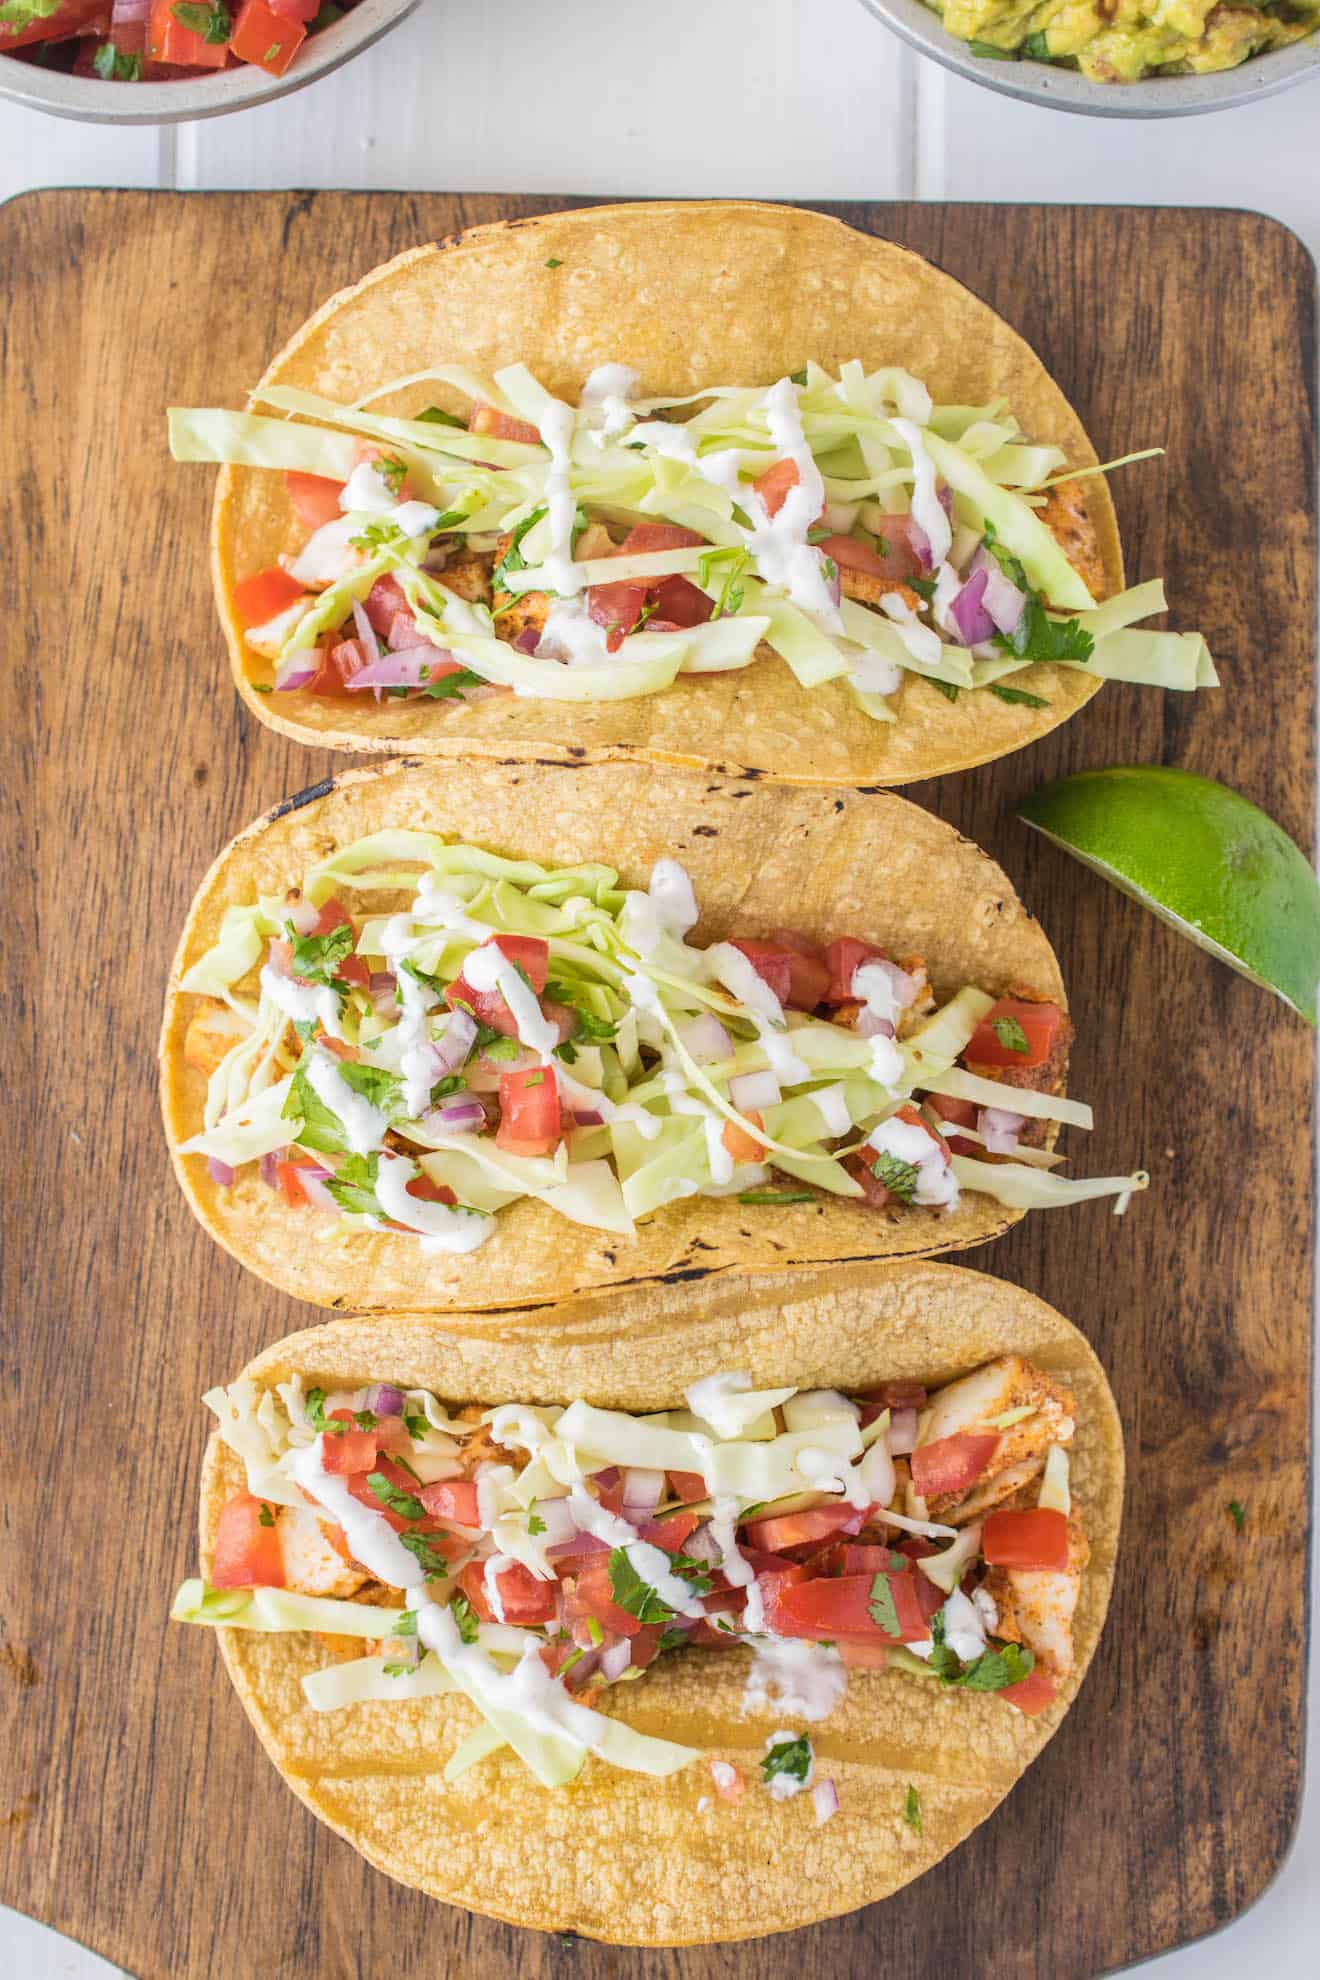 3 Baja style fish tacos lined up on a serving board from overhead